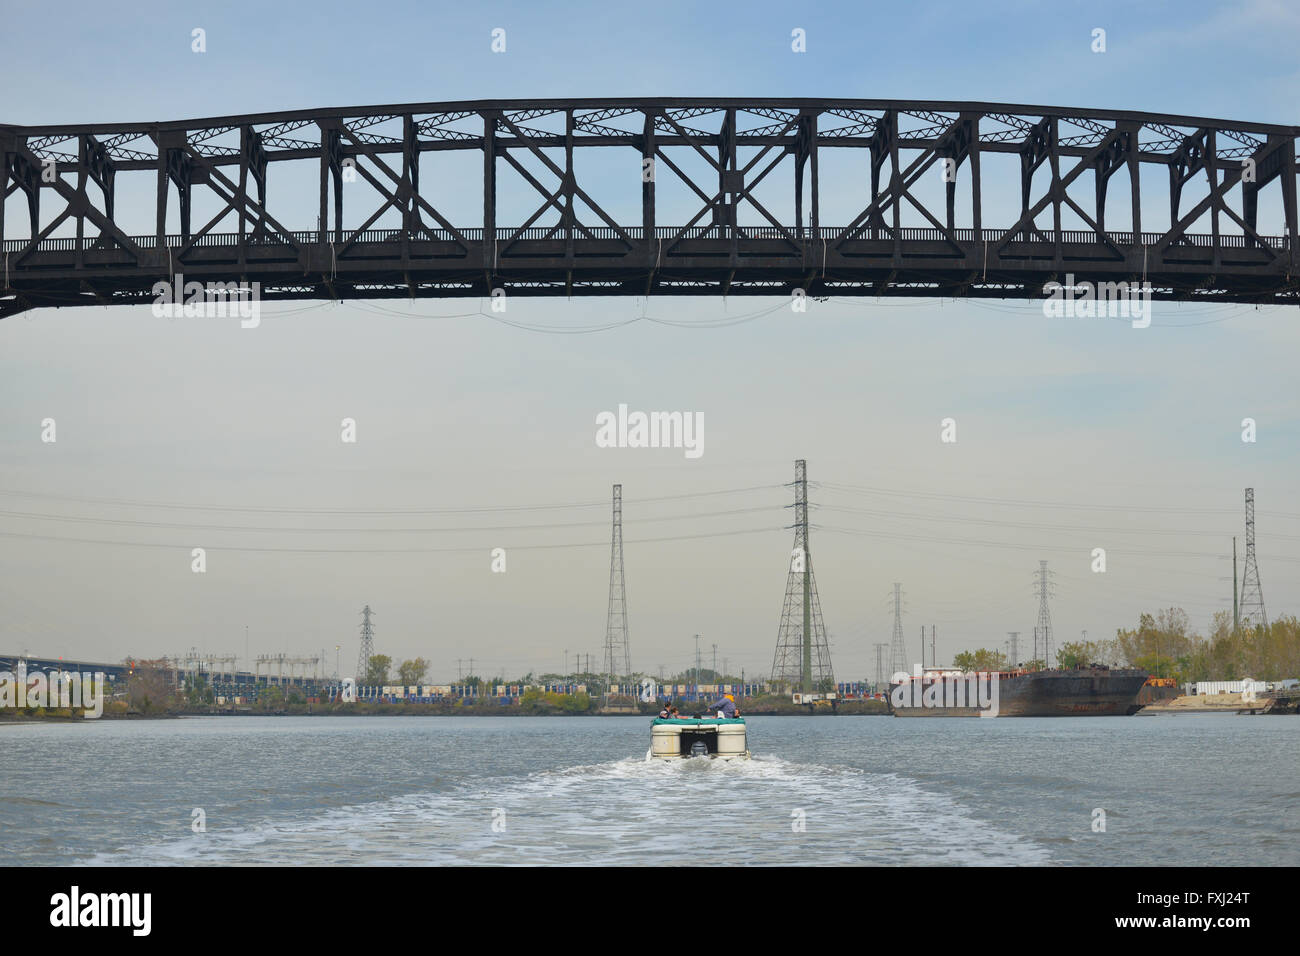 The Newark Riverfront Revival runs boat tours on Passaic River, offering lessons about history and the environment. Newark, NJ. Stock Photo